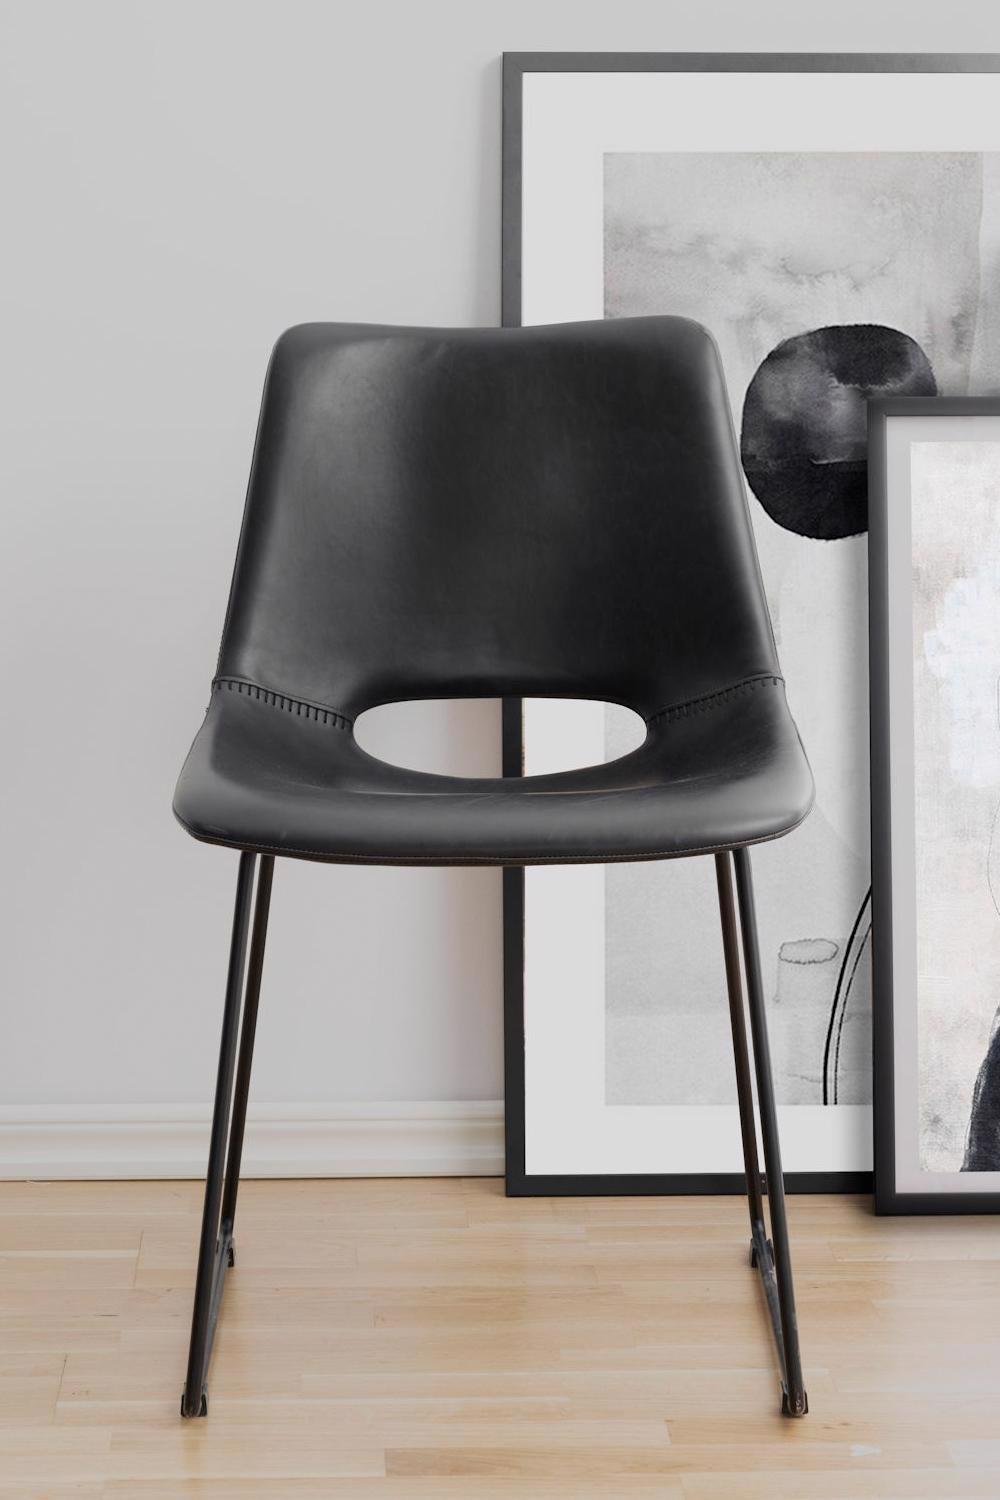 Pair Of Faux Leather Black Dining Chairs With Black Metal Frame Legs